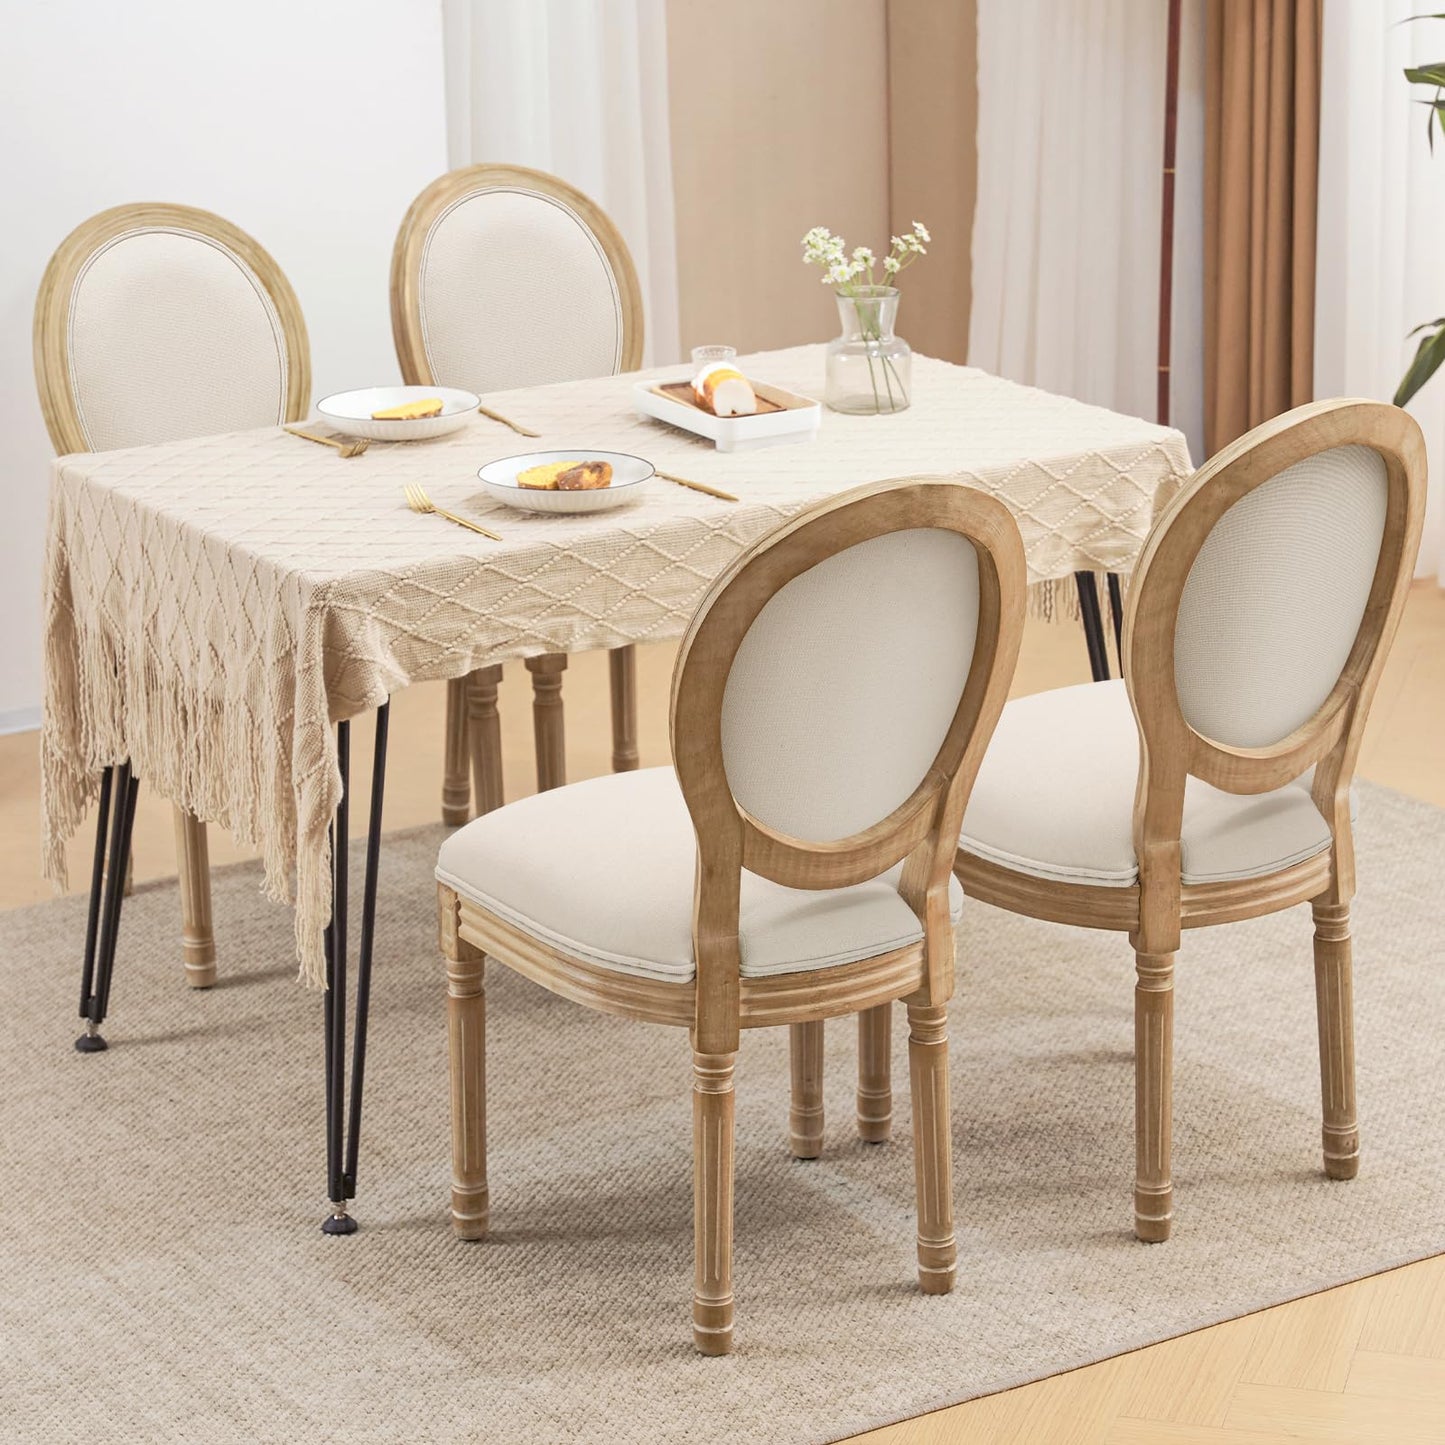 Furniliving French Country Dining Chairs Set of 4, Upholstered Dining Room Chairs with Round Back Farmhouse Kitchen Chairs for Living Room, Kitchen, Restaurant (Beige-Round)